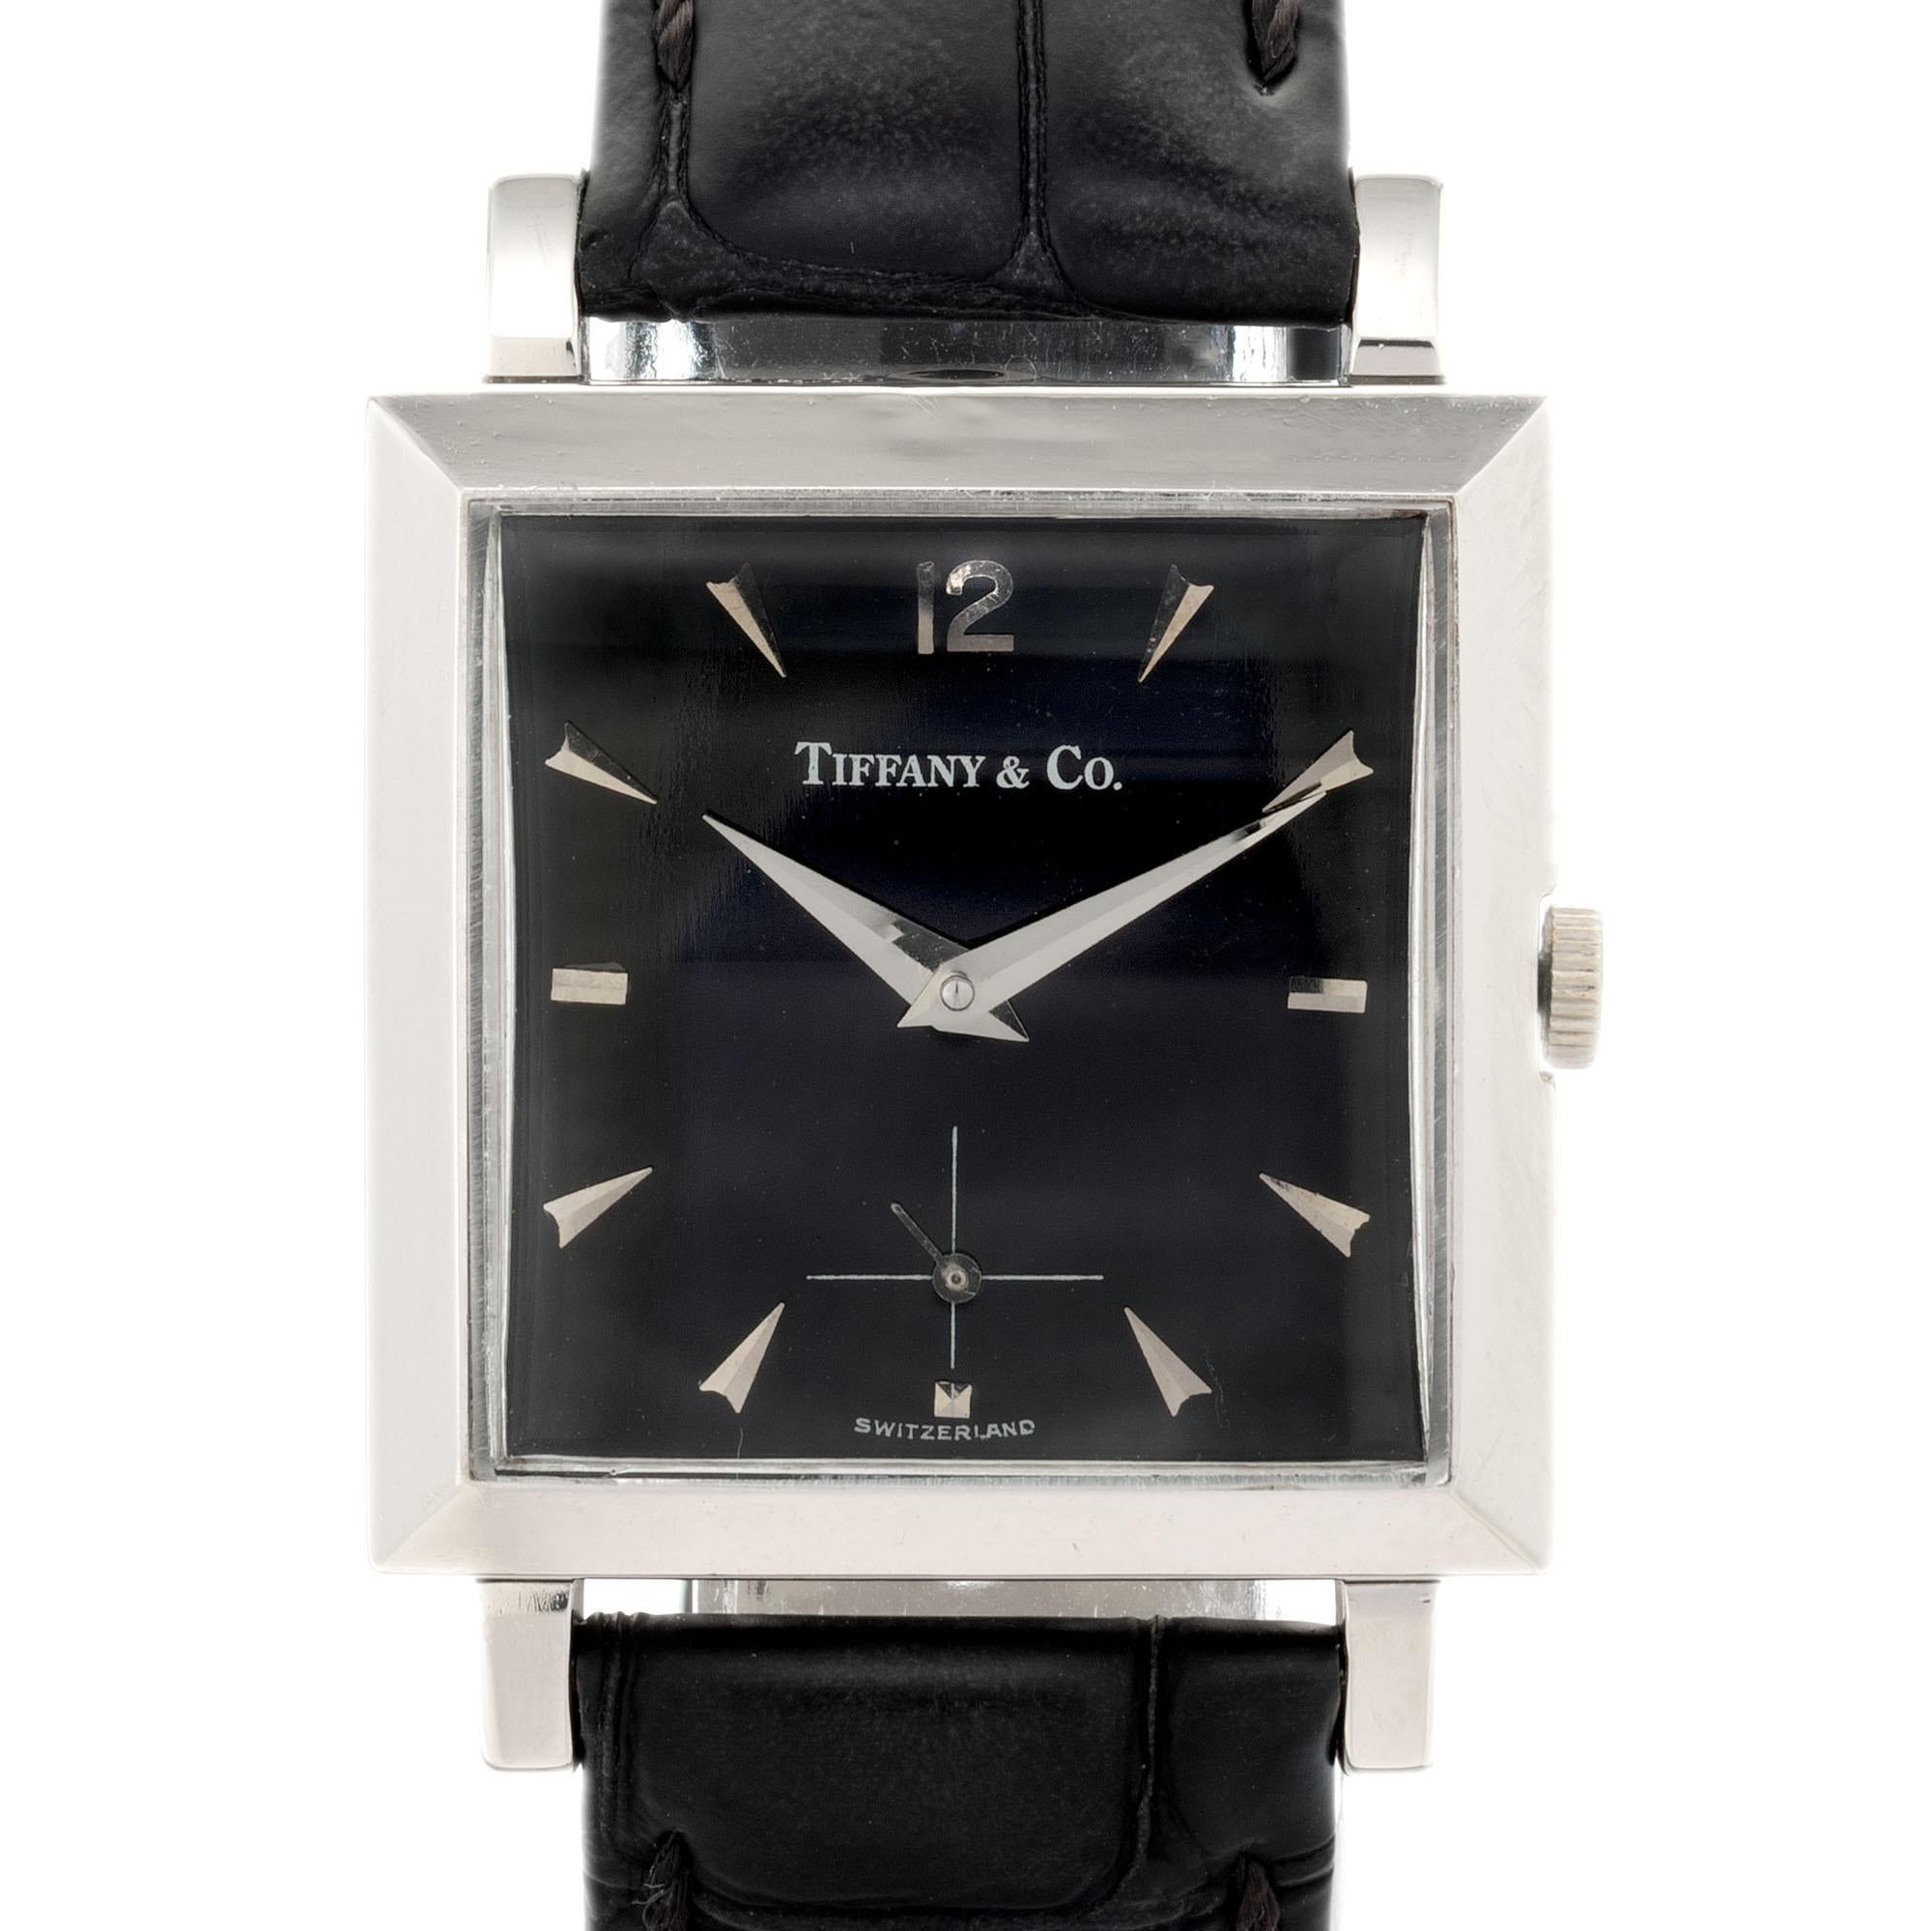  1960’s black dial, Rectangular Tiffany & Co Movado strap wristwatch with Movado 0309 manual wind 17 jewel movement. 

Length: 38.8mm
Width: 28.2mm
Band width at case: 18mm
Case thickness: 9.41mm
Band: Black genuine leather
Dial: Black silver